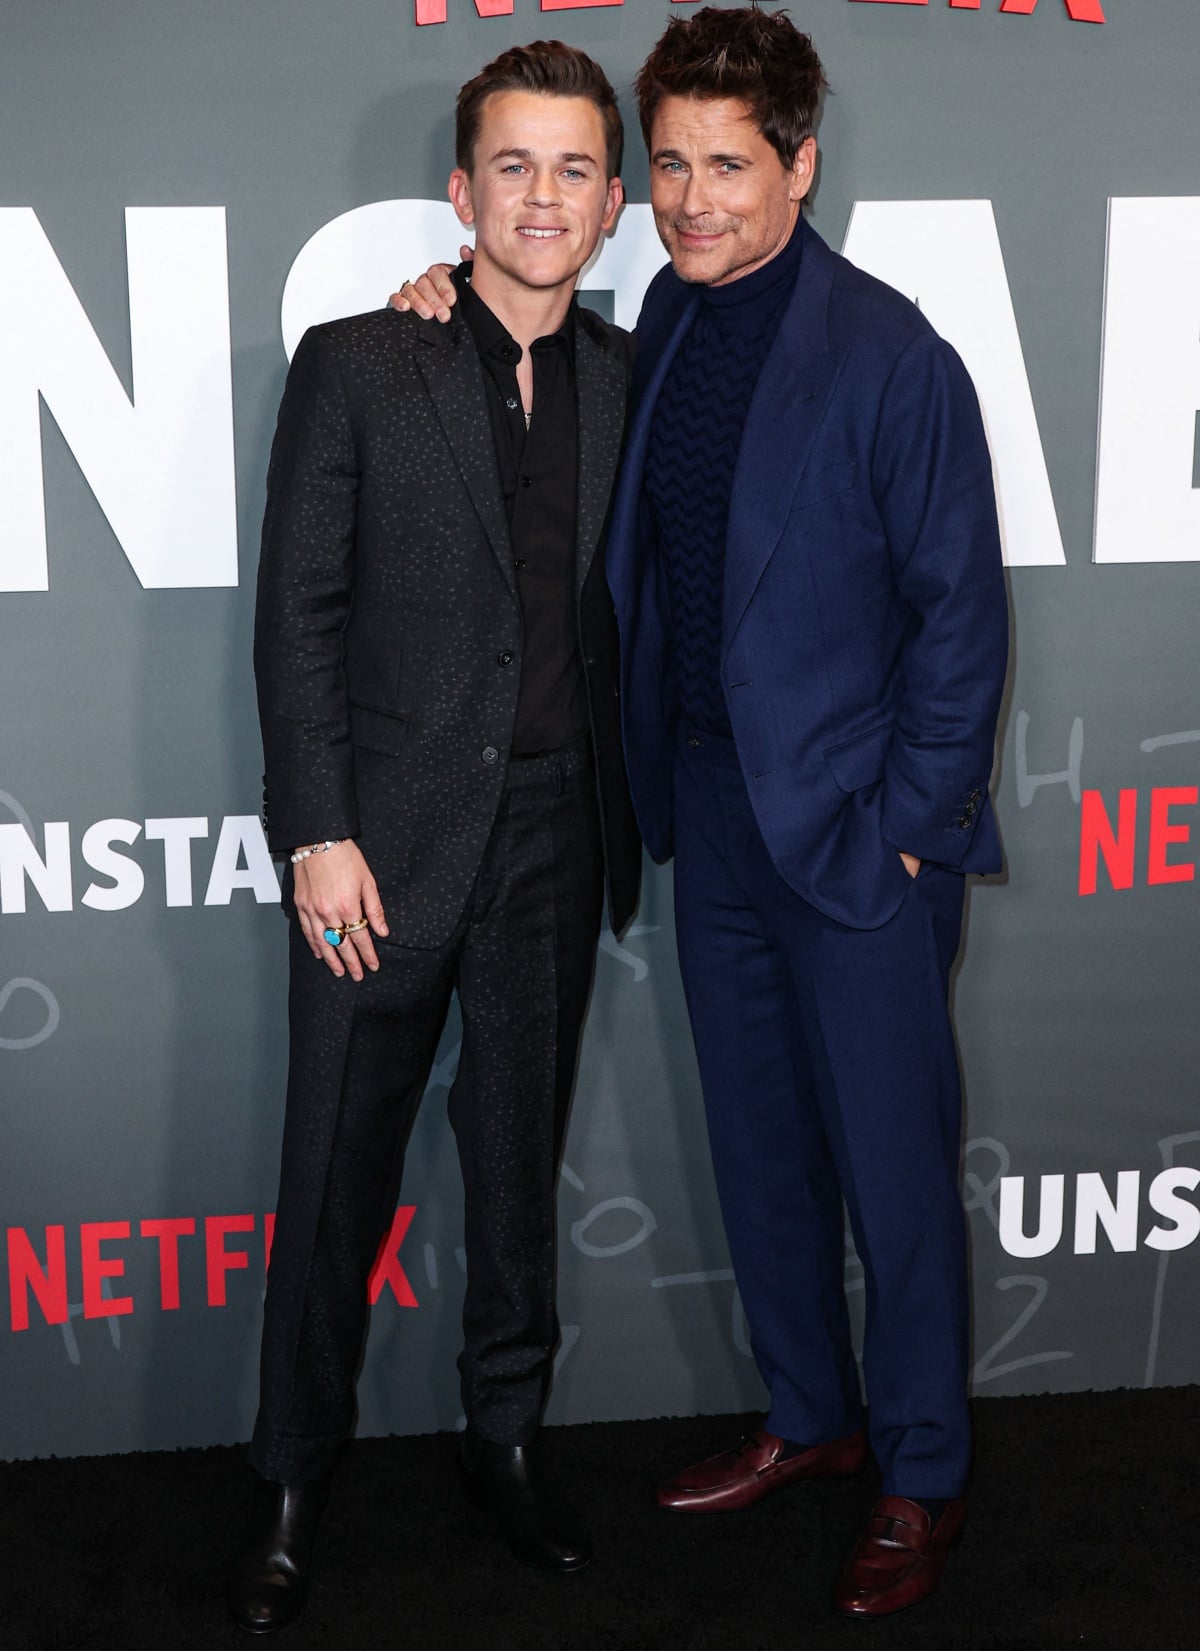 Real-life son-and-father duo John Owen Lowe and Rob Lowe at the premiere of Unstable